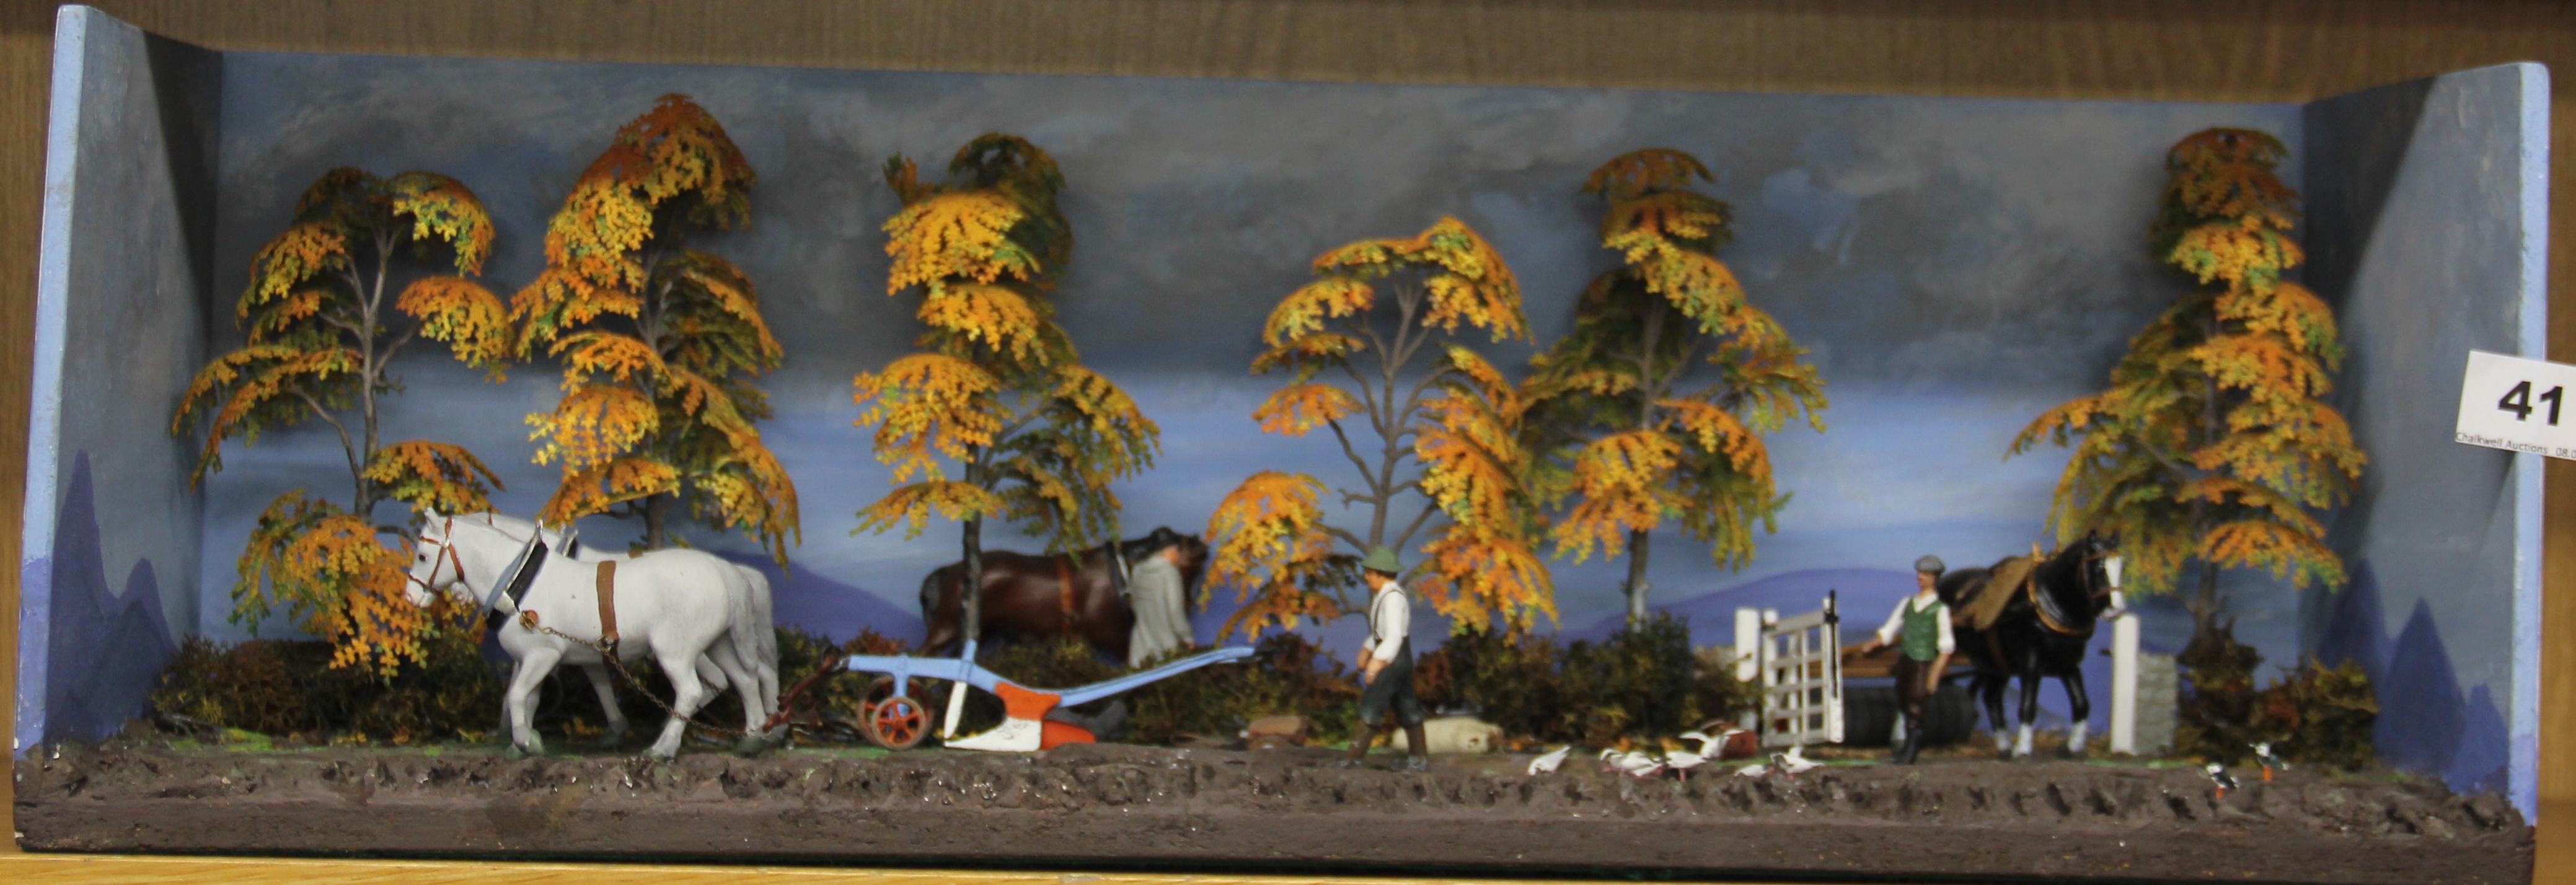 An interesting tableau of a farming scene made with hand painted metal figures, W. 57 x 21cm.